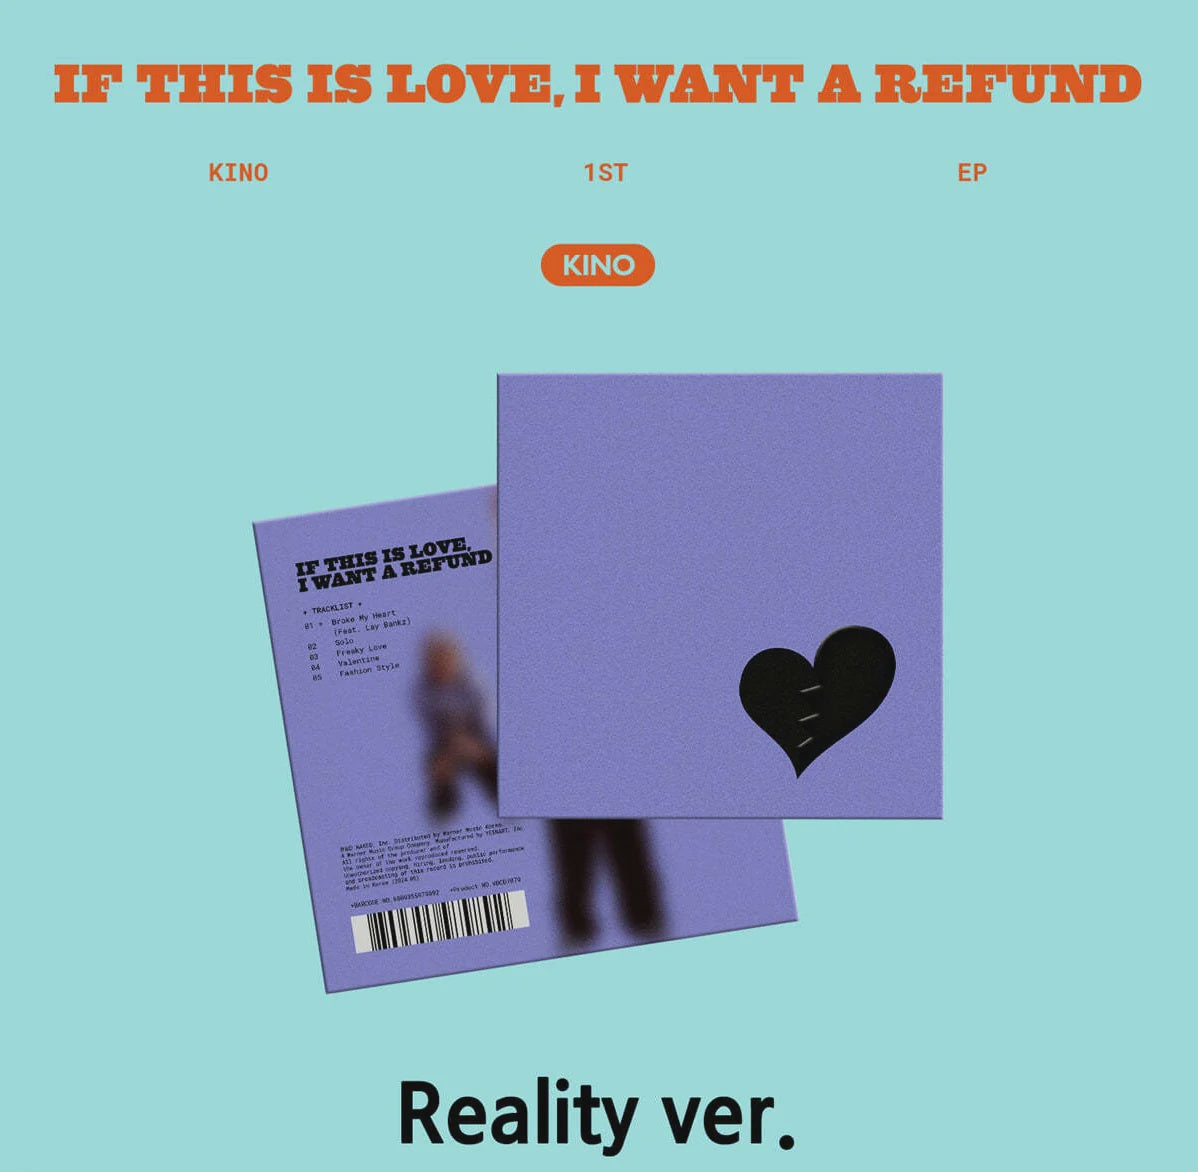 Pentagon KINO 1st EP Album "If This Is Love, I Want A Refund" (Reality Ver.)